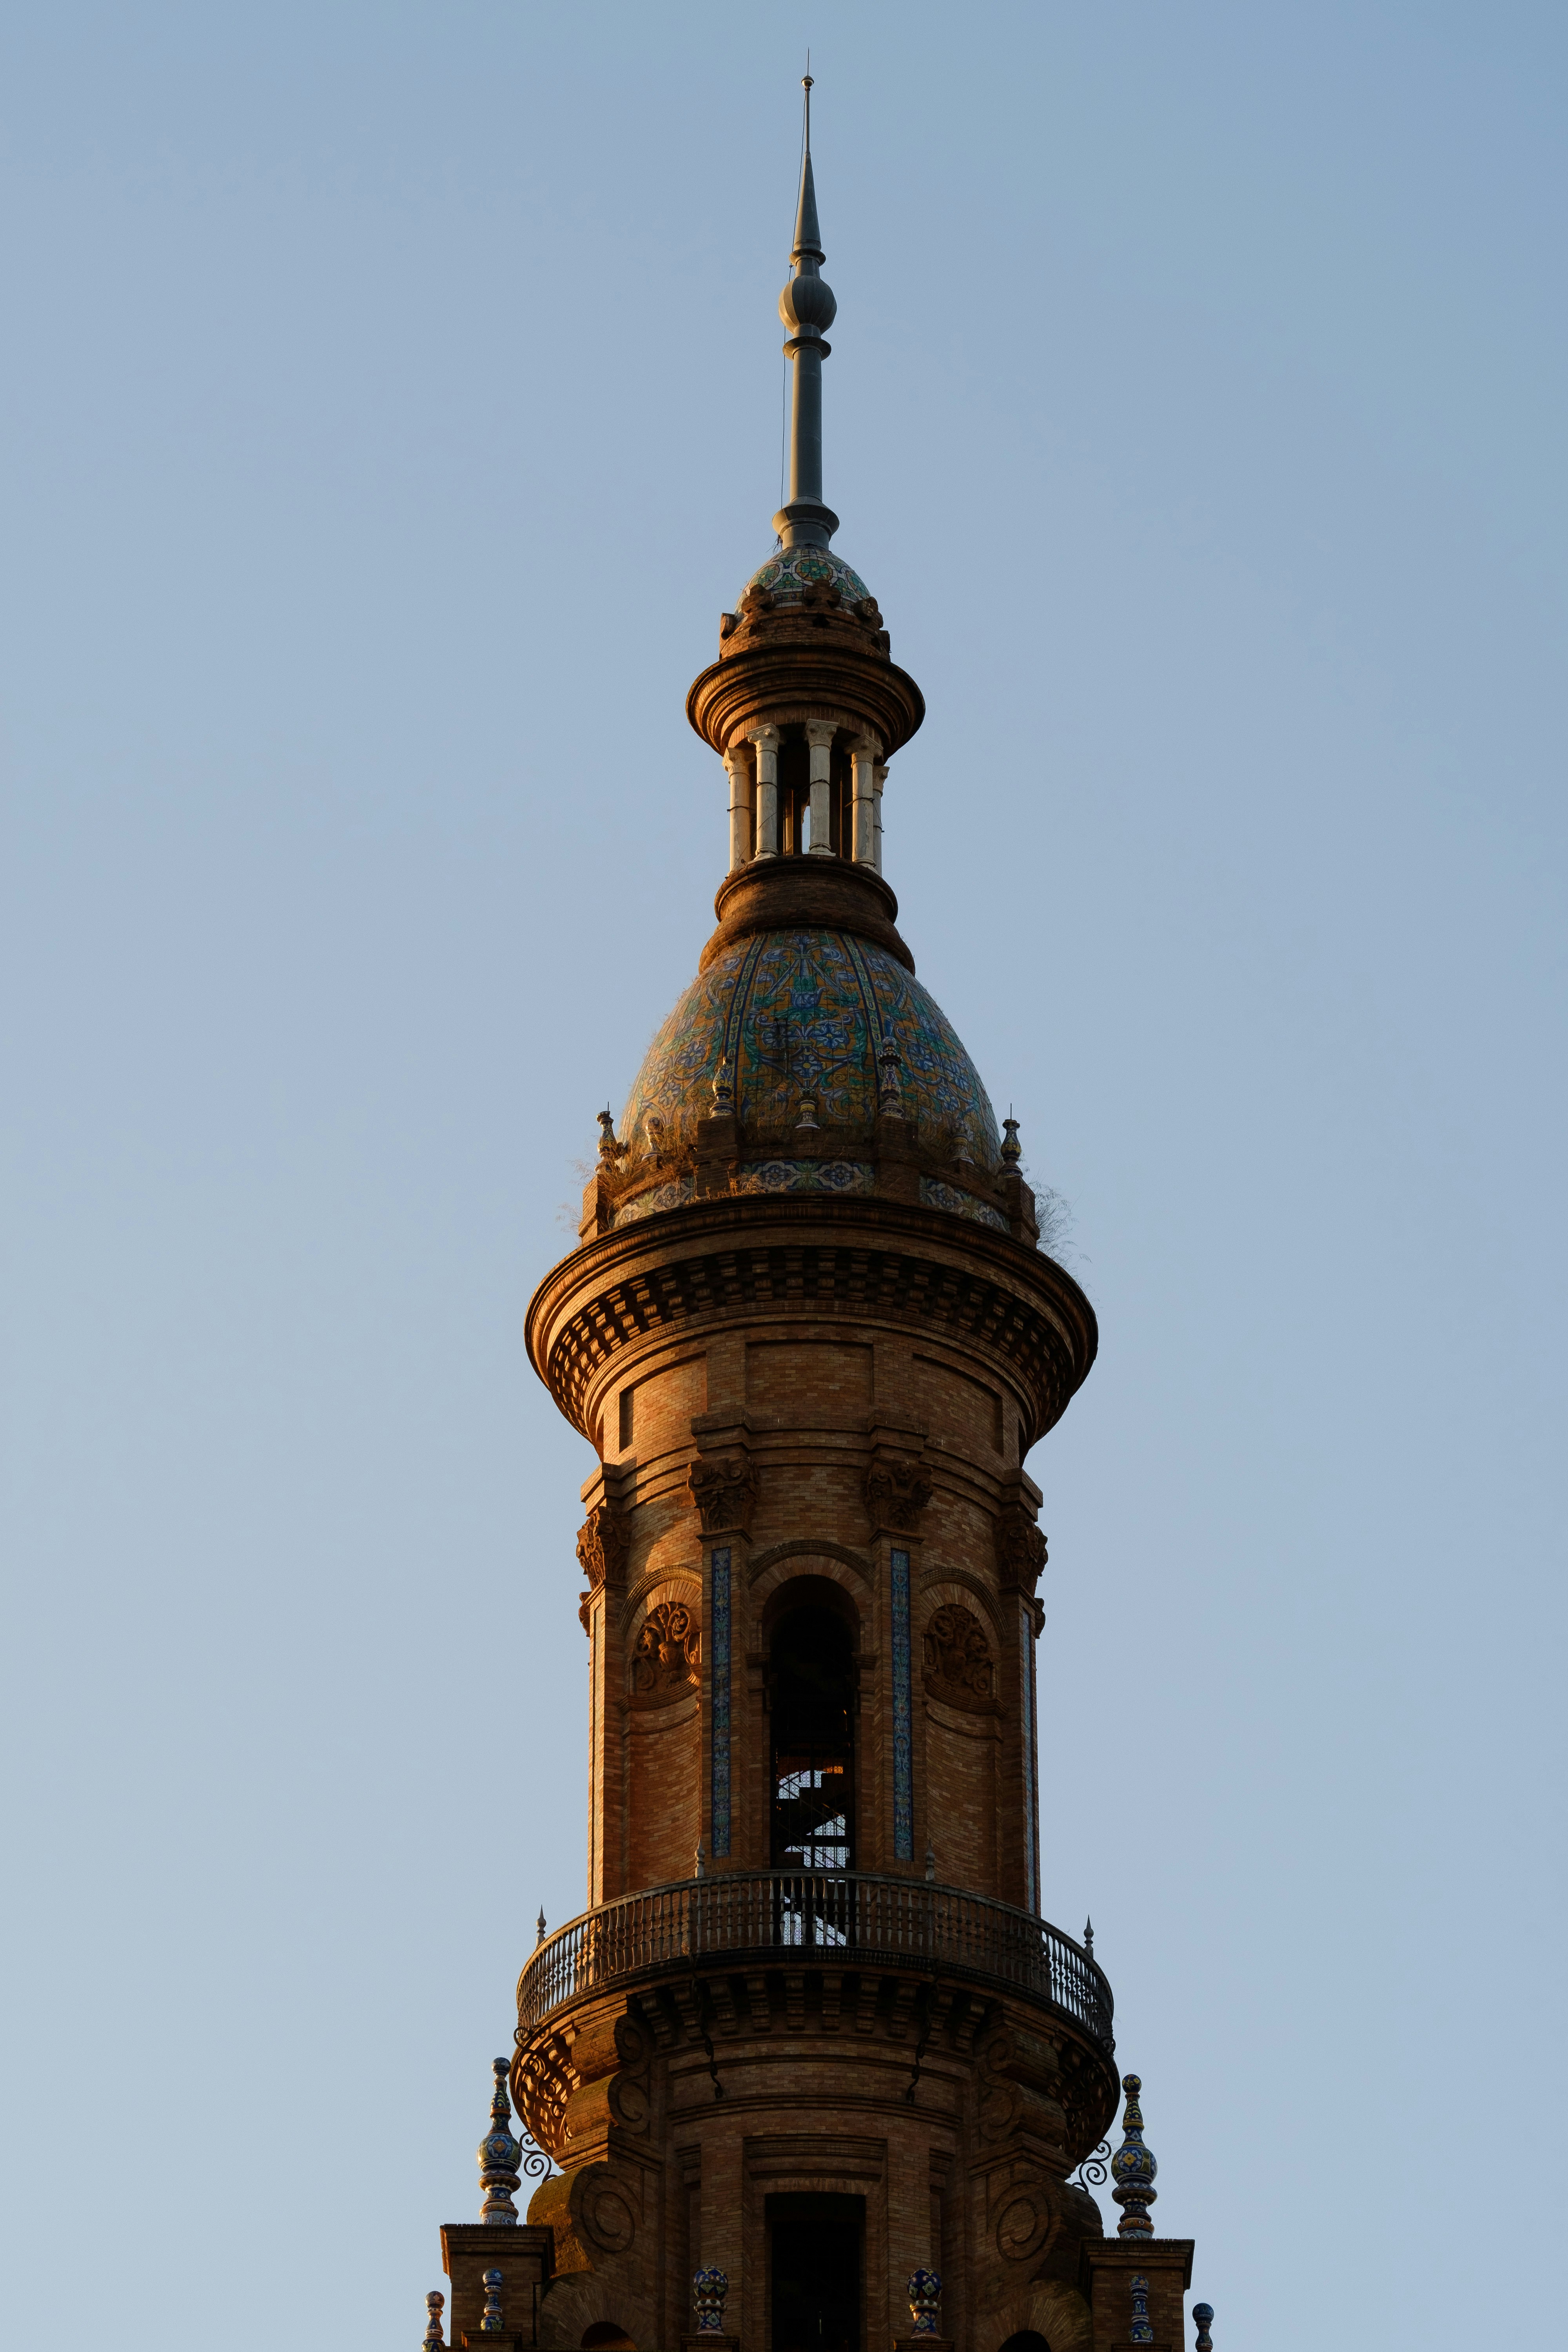 One of the towers of Plaza de España in Seville.